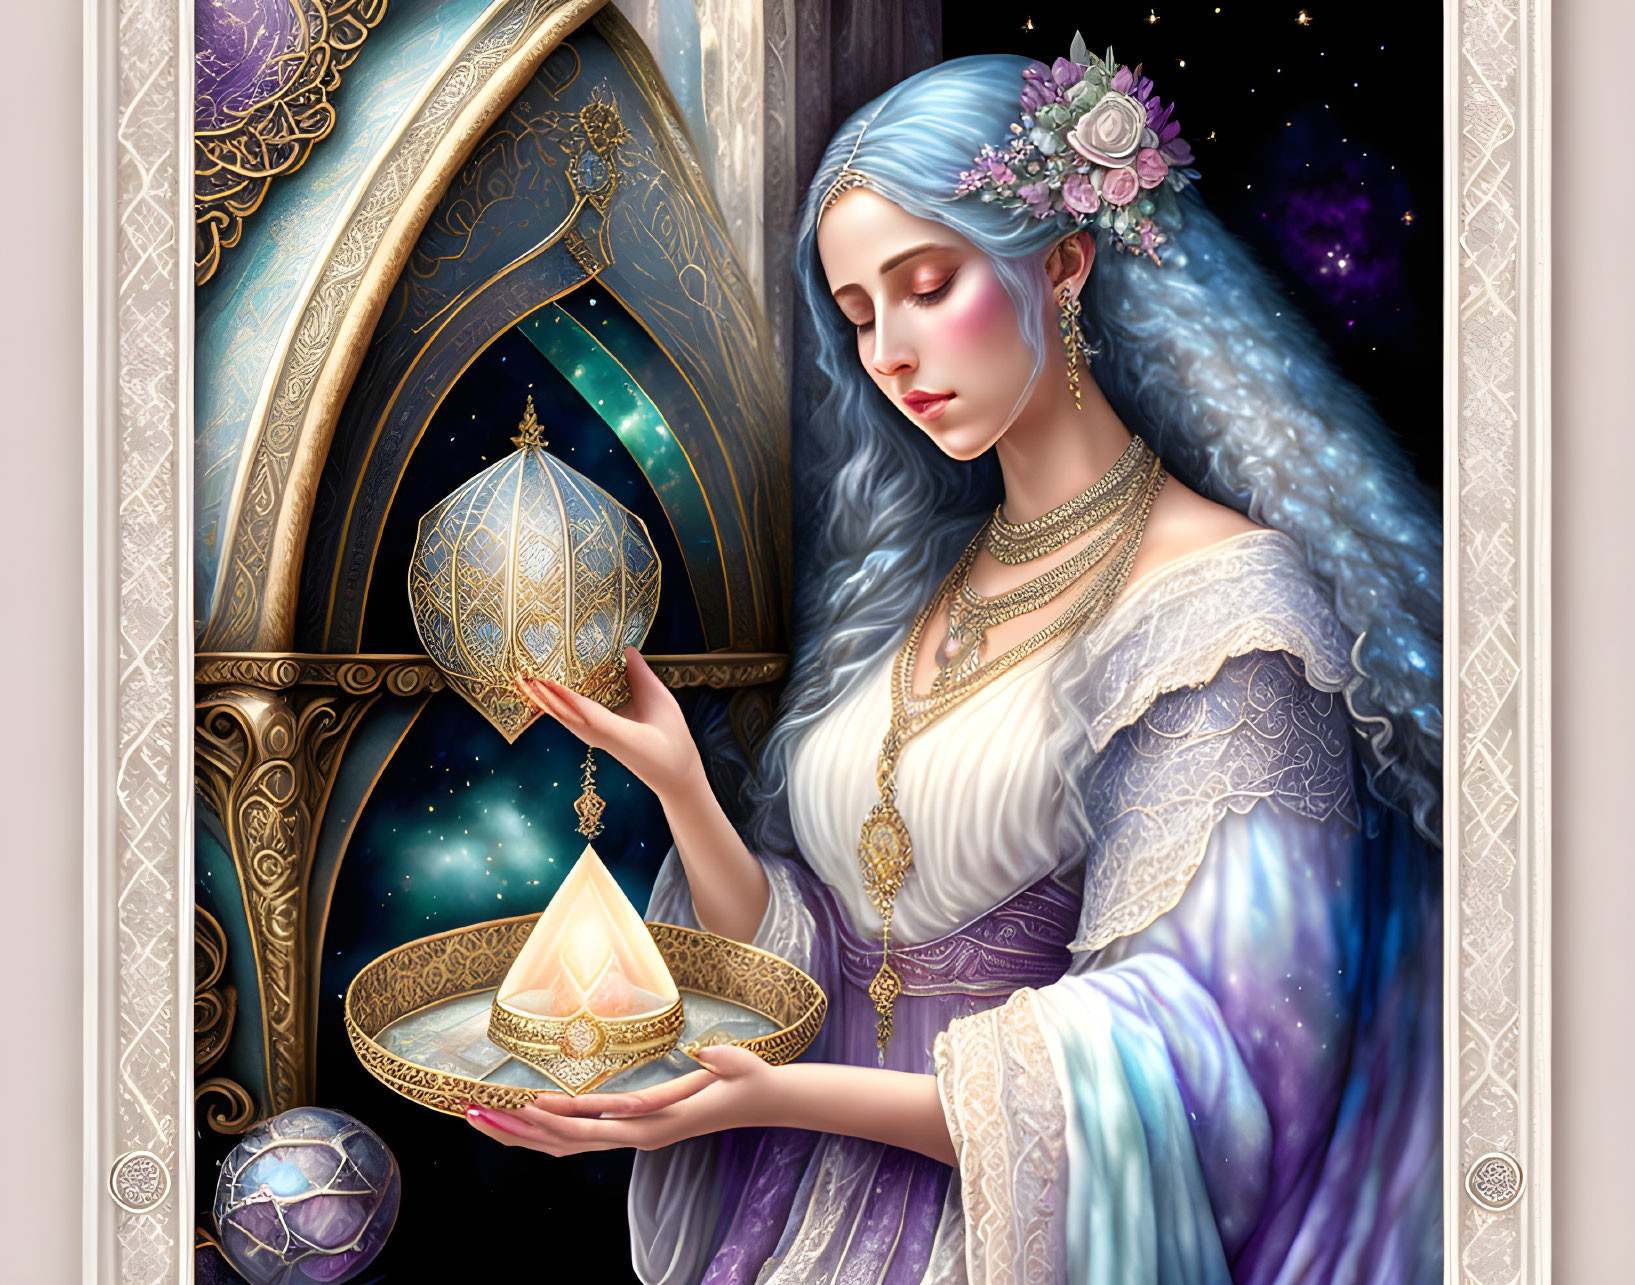 Blue-haired woman in purple gown holding artifact in celestial-themed room